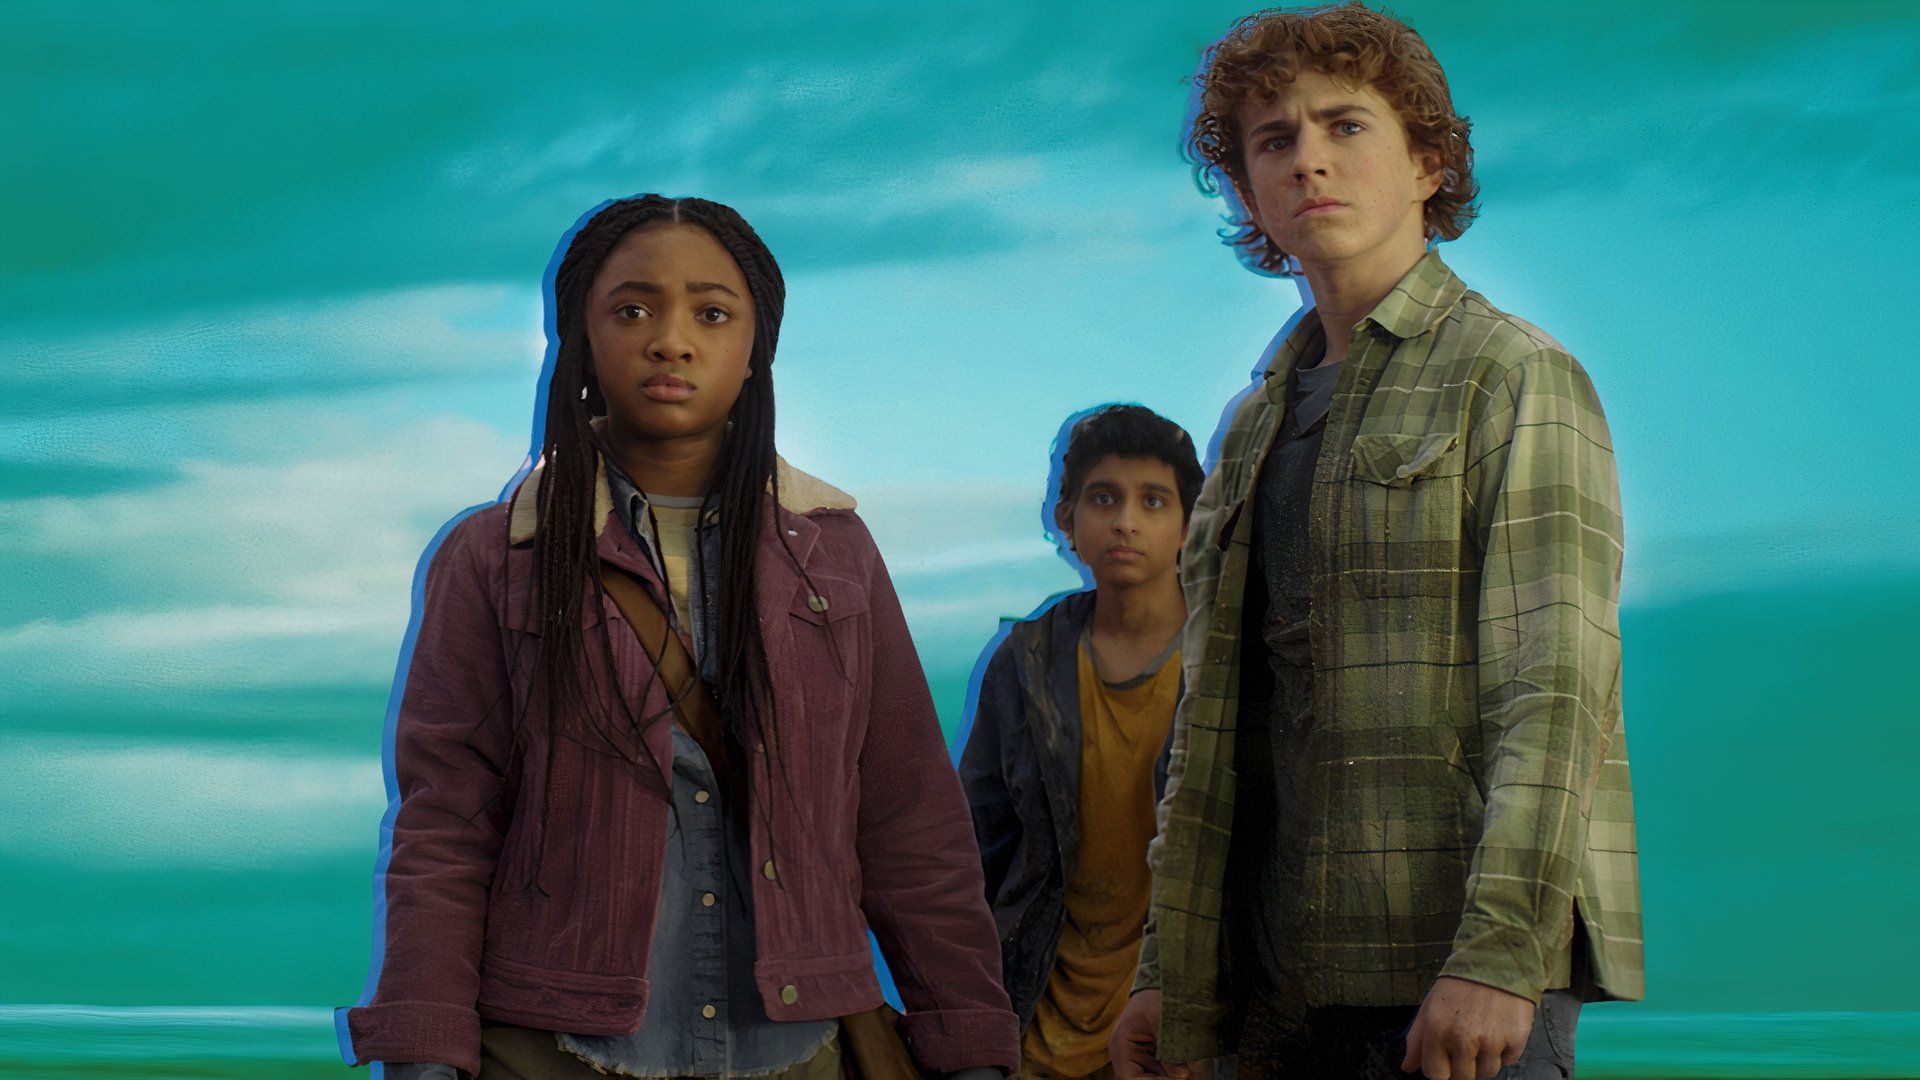 Walker Scobell, Leah Sava Jeffries, and Aryan Simhadri as Percy, Annabeth, & Grover  in Percy Jackson and the Olympians